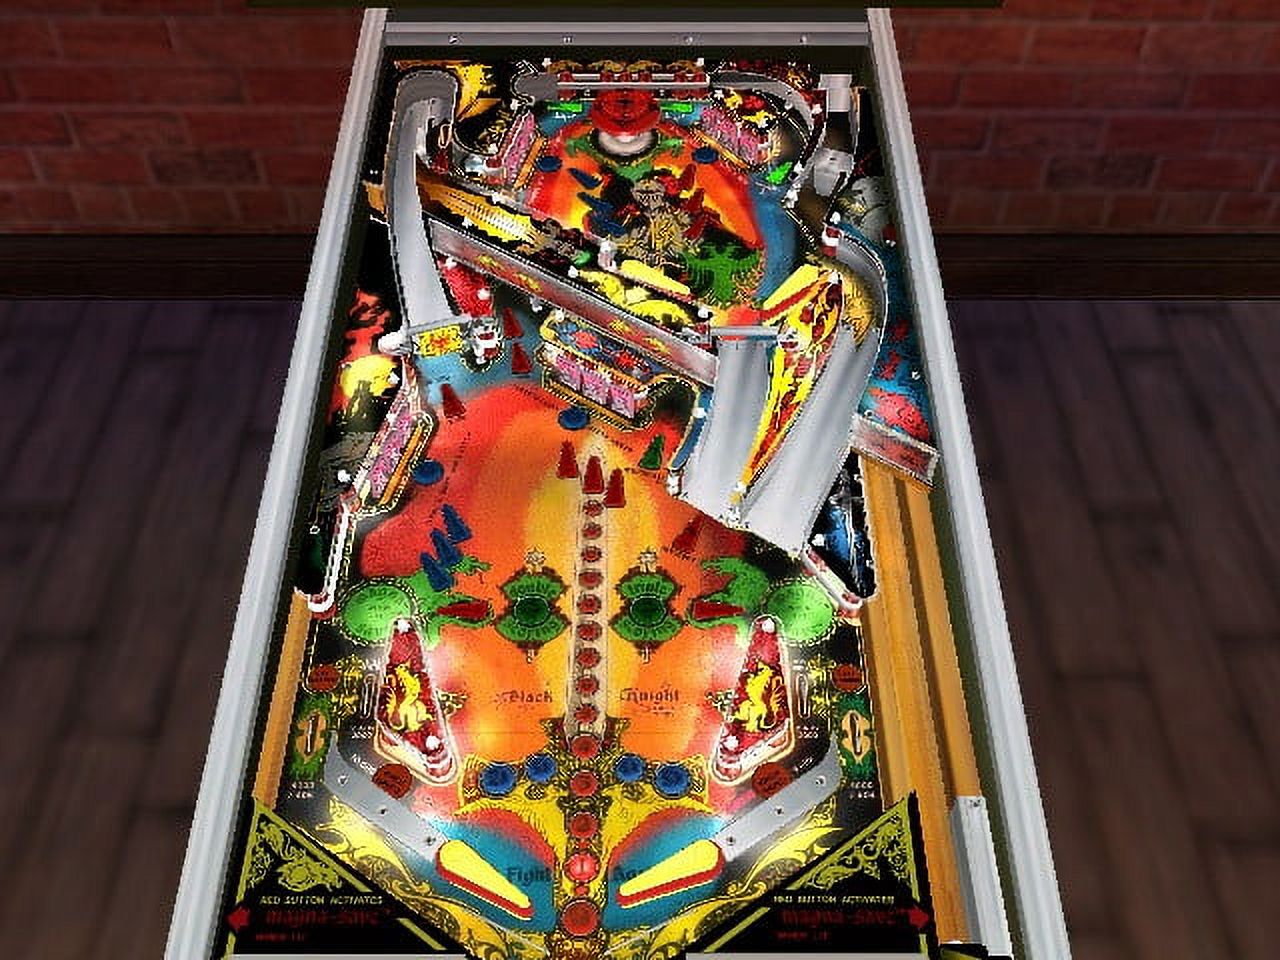 Pinball Hall of Fame: The Williams Collection - image 5 of 12